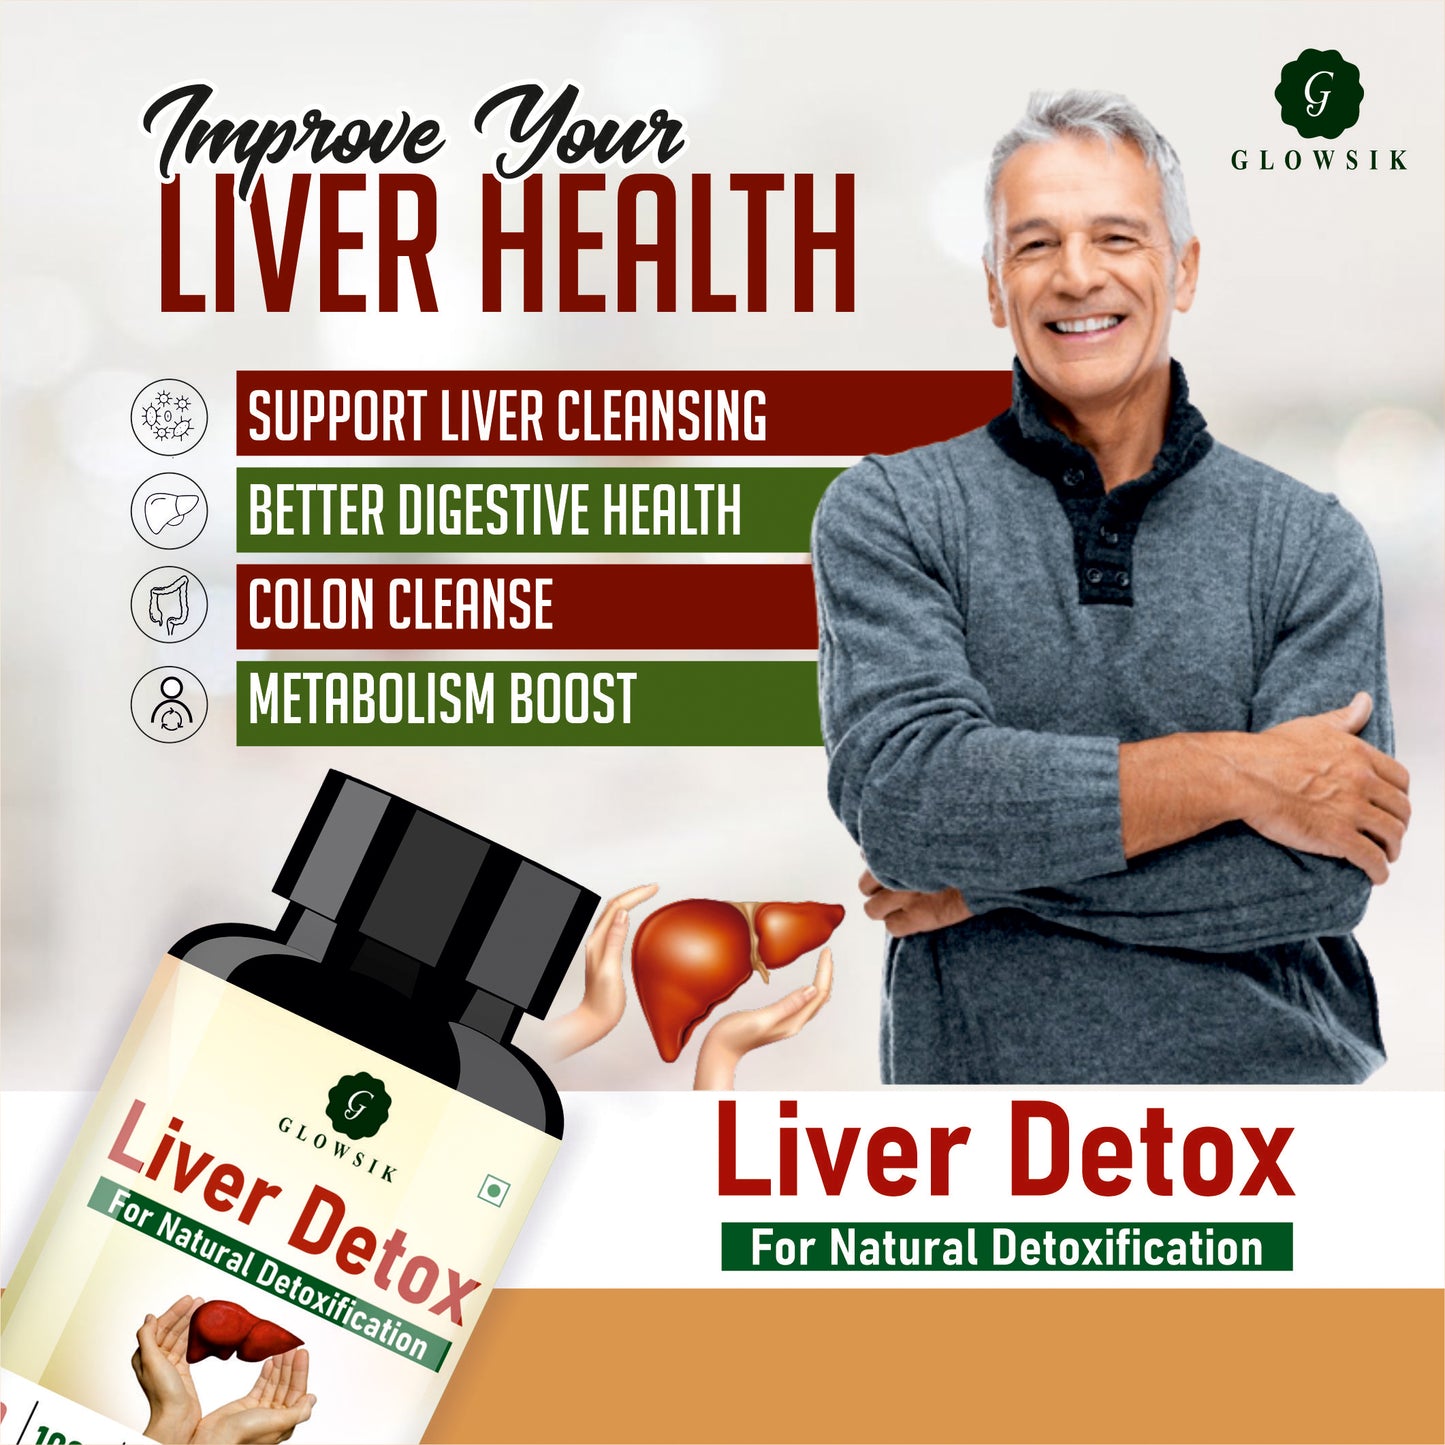 Glowsik Liver Detox Supplement Ayurvedic 1000mg with Milk Thistle for Liver Cleanse - 90 capsules